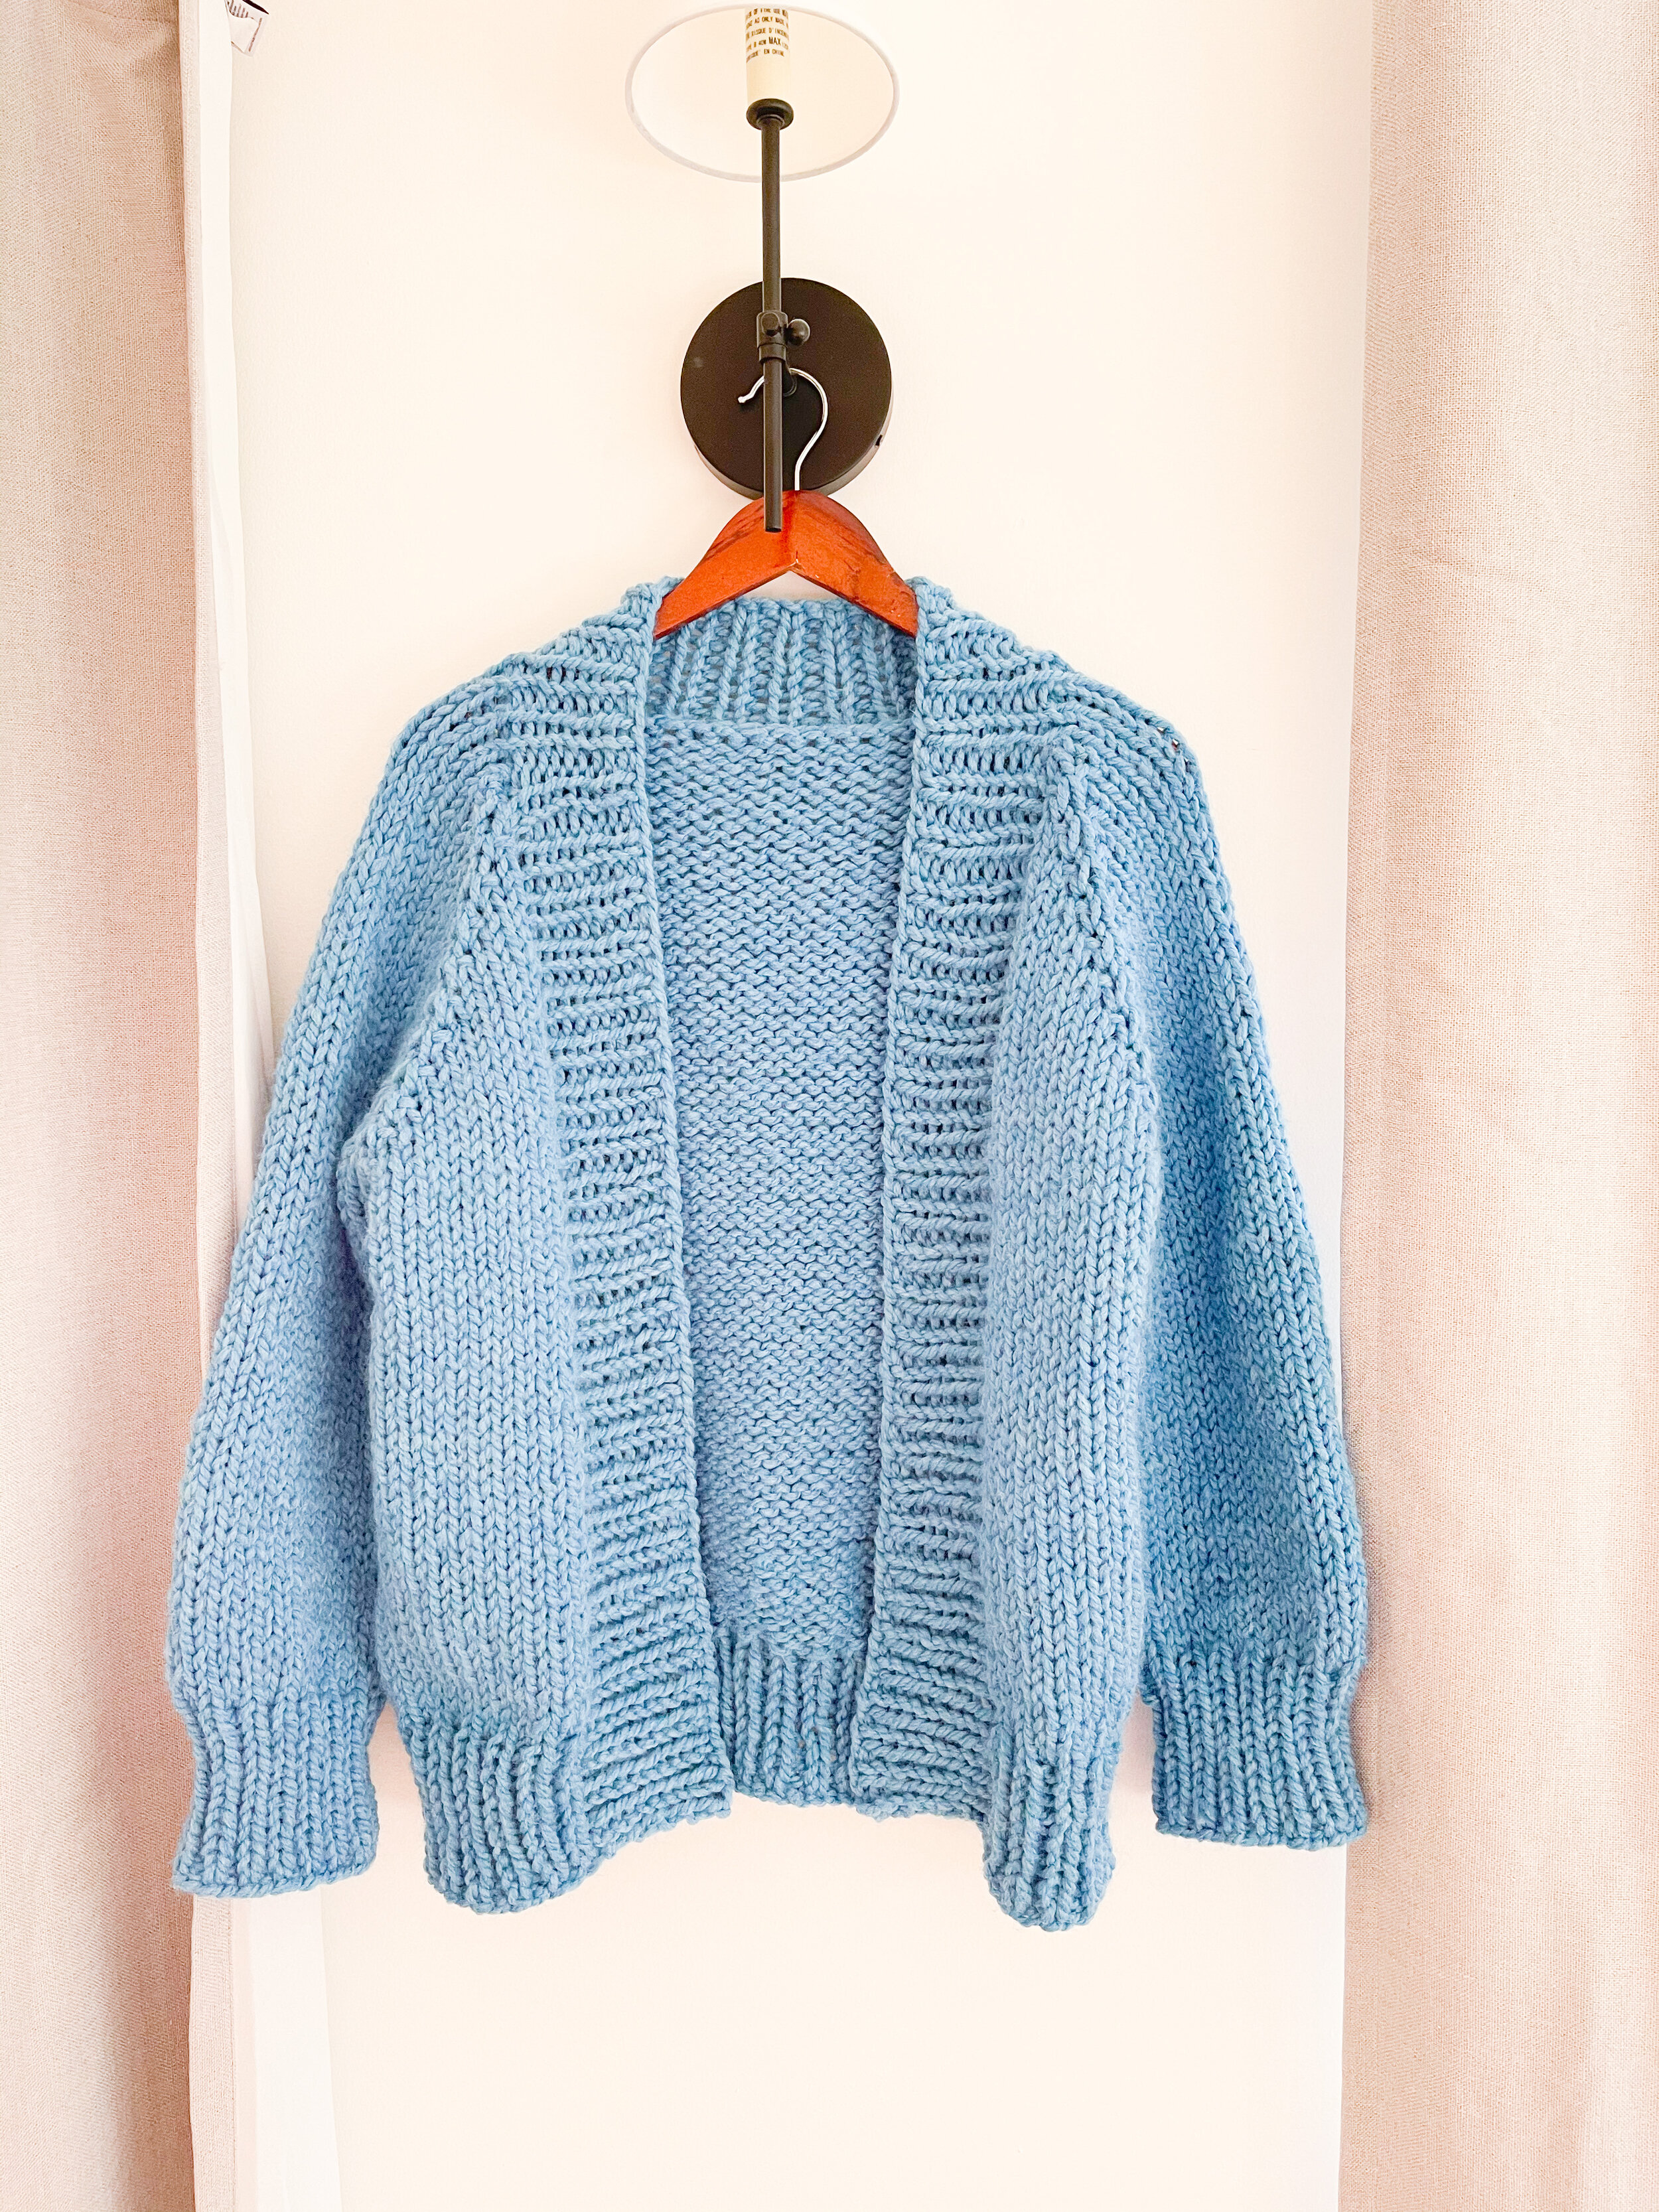 Kemi ost ært How to Knit a Simple Cardigan Sweater Step by Step — Ashley Lillis